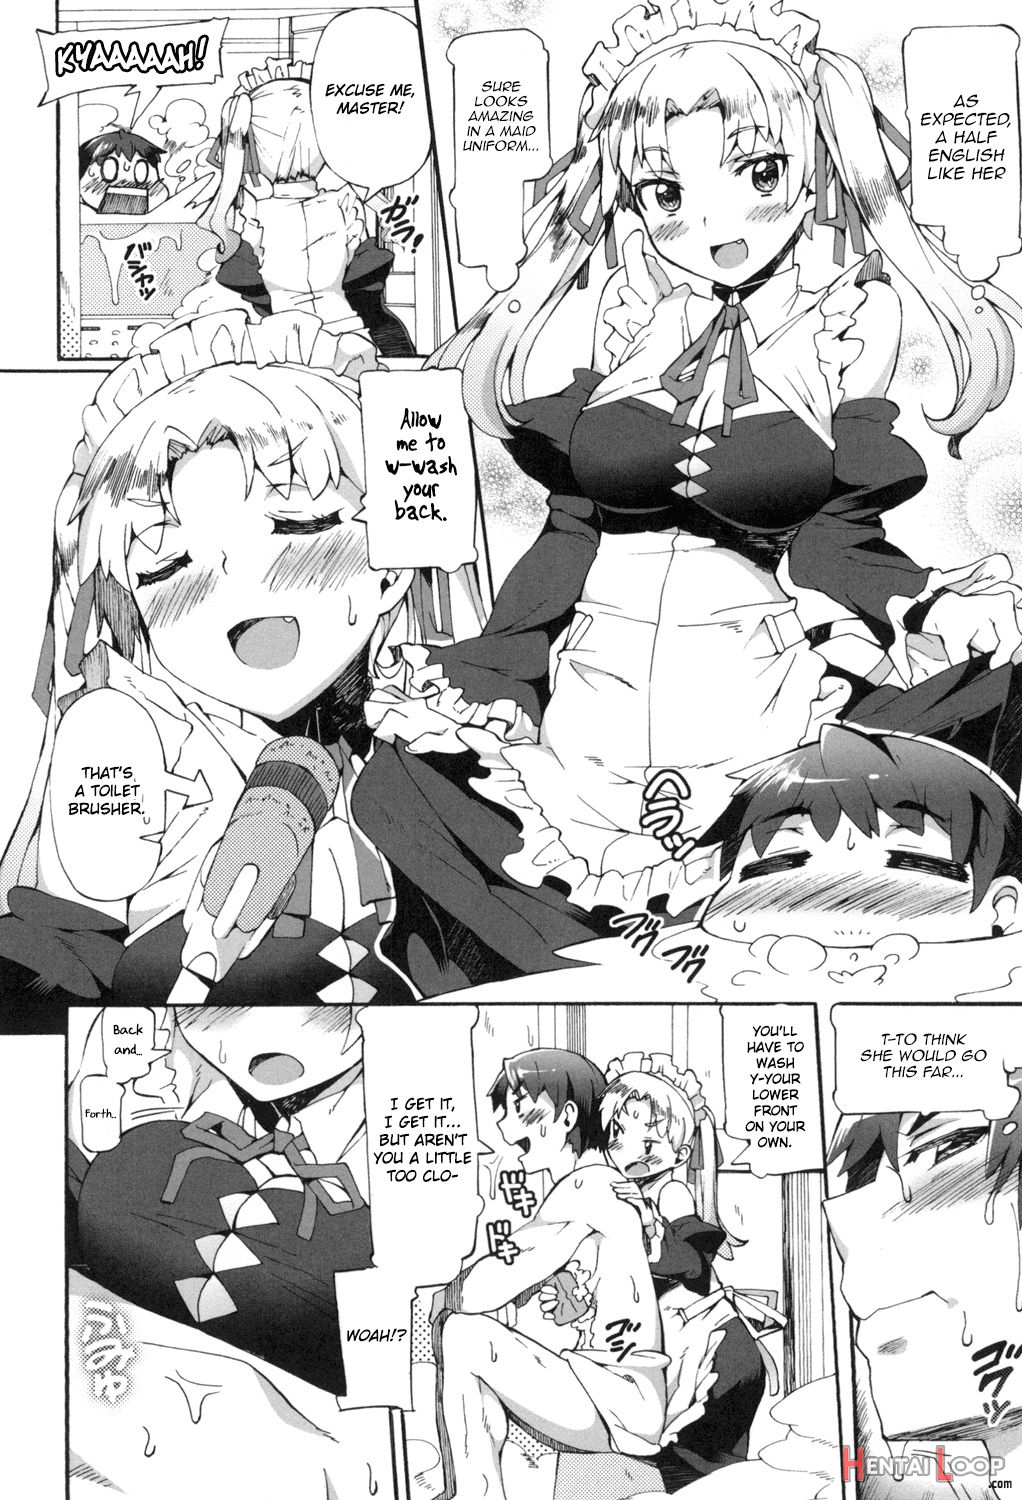 Maid In Japan! page 4